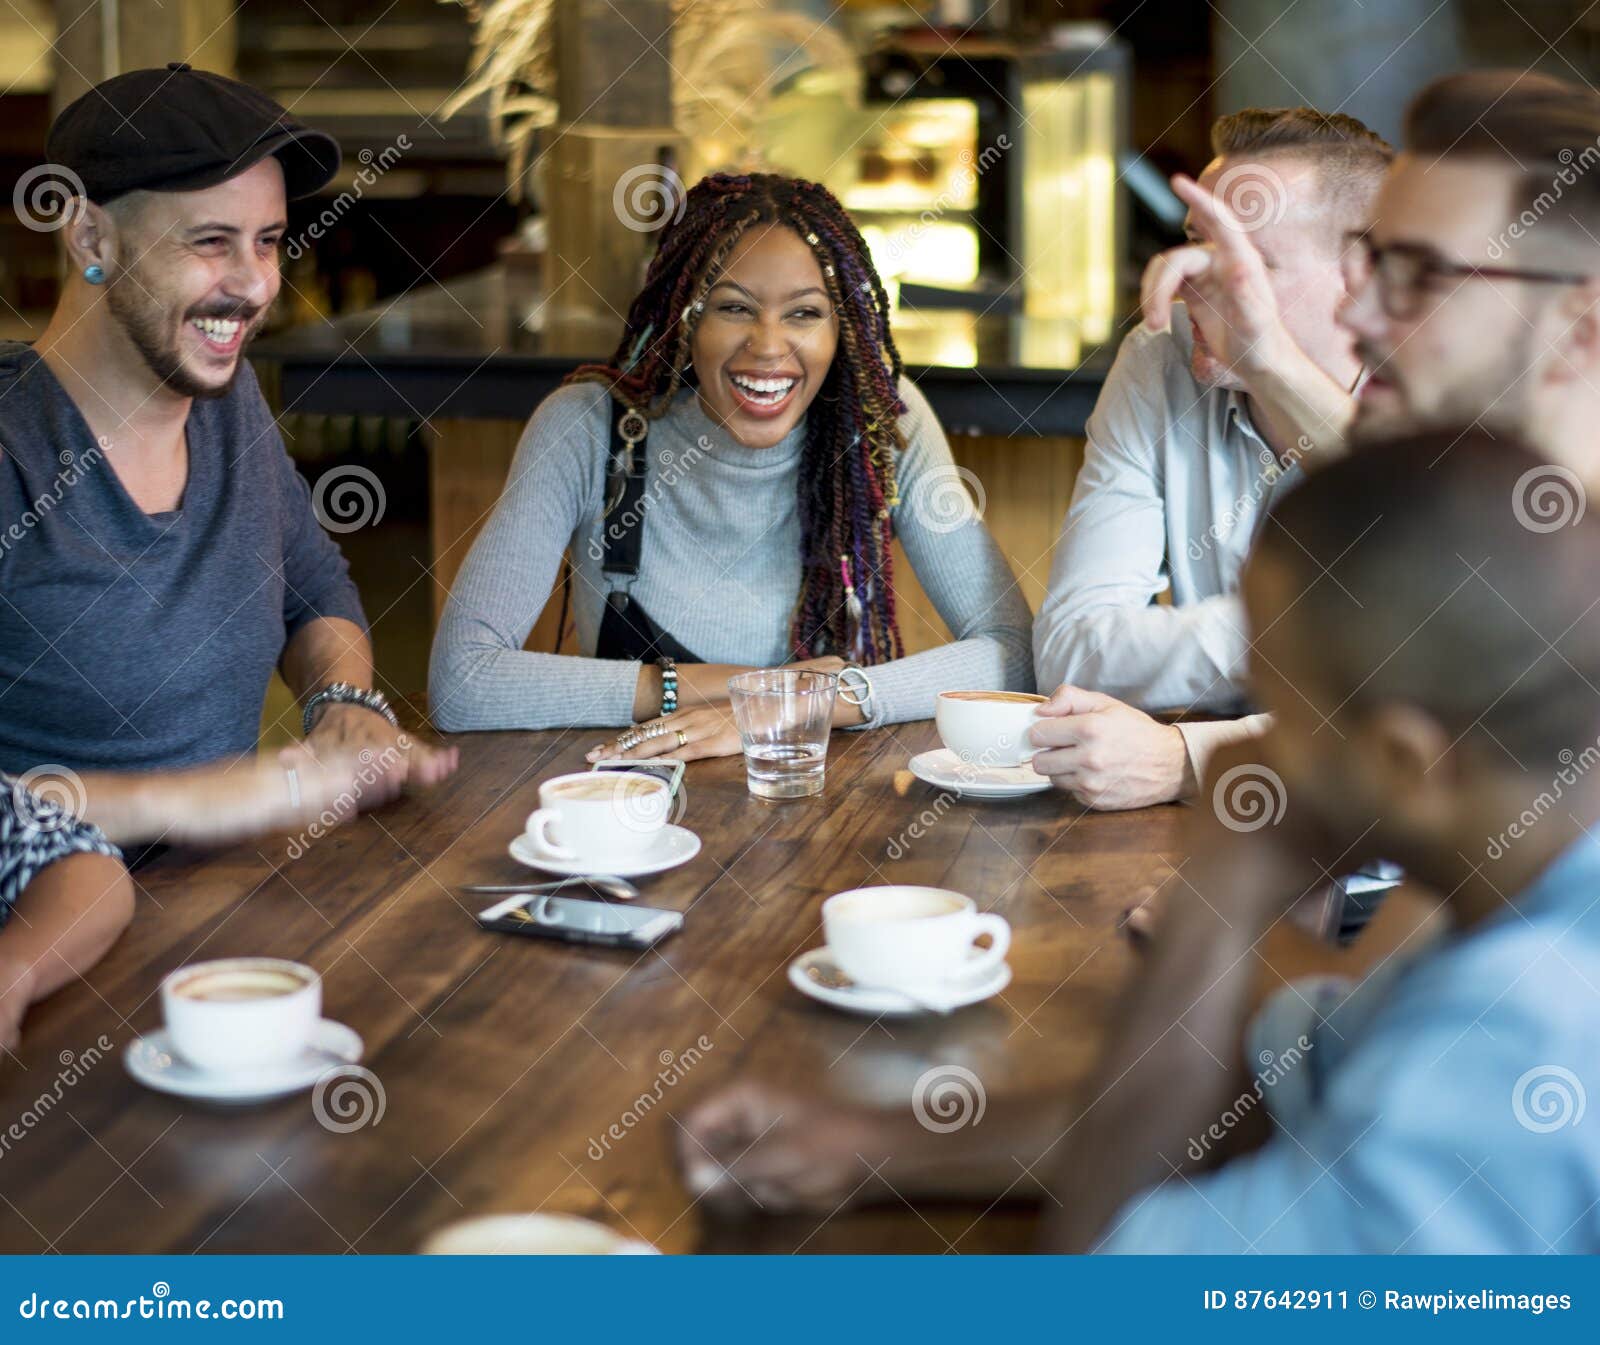 diverse people hang out coffee cafe friendship